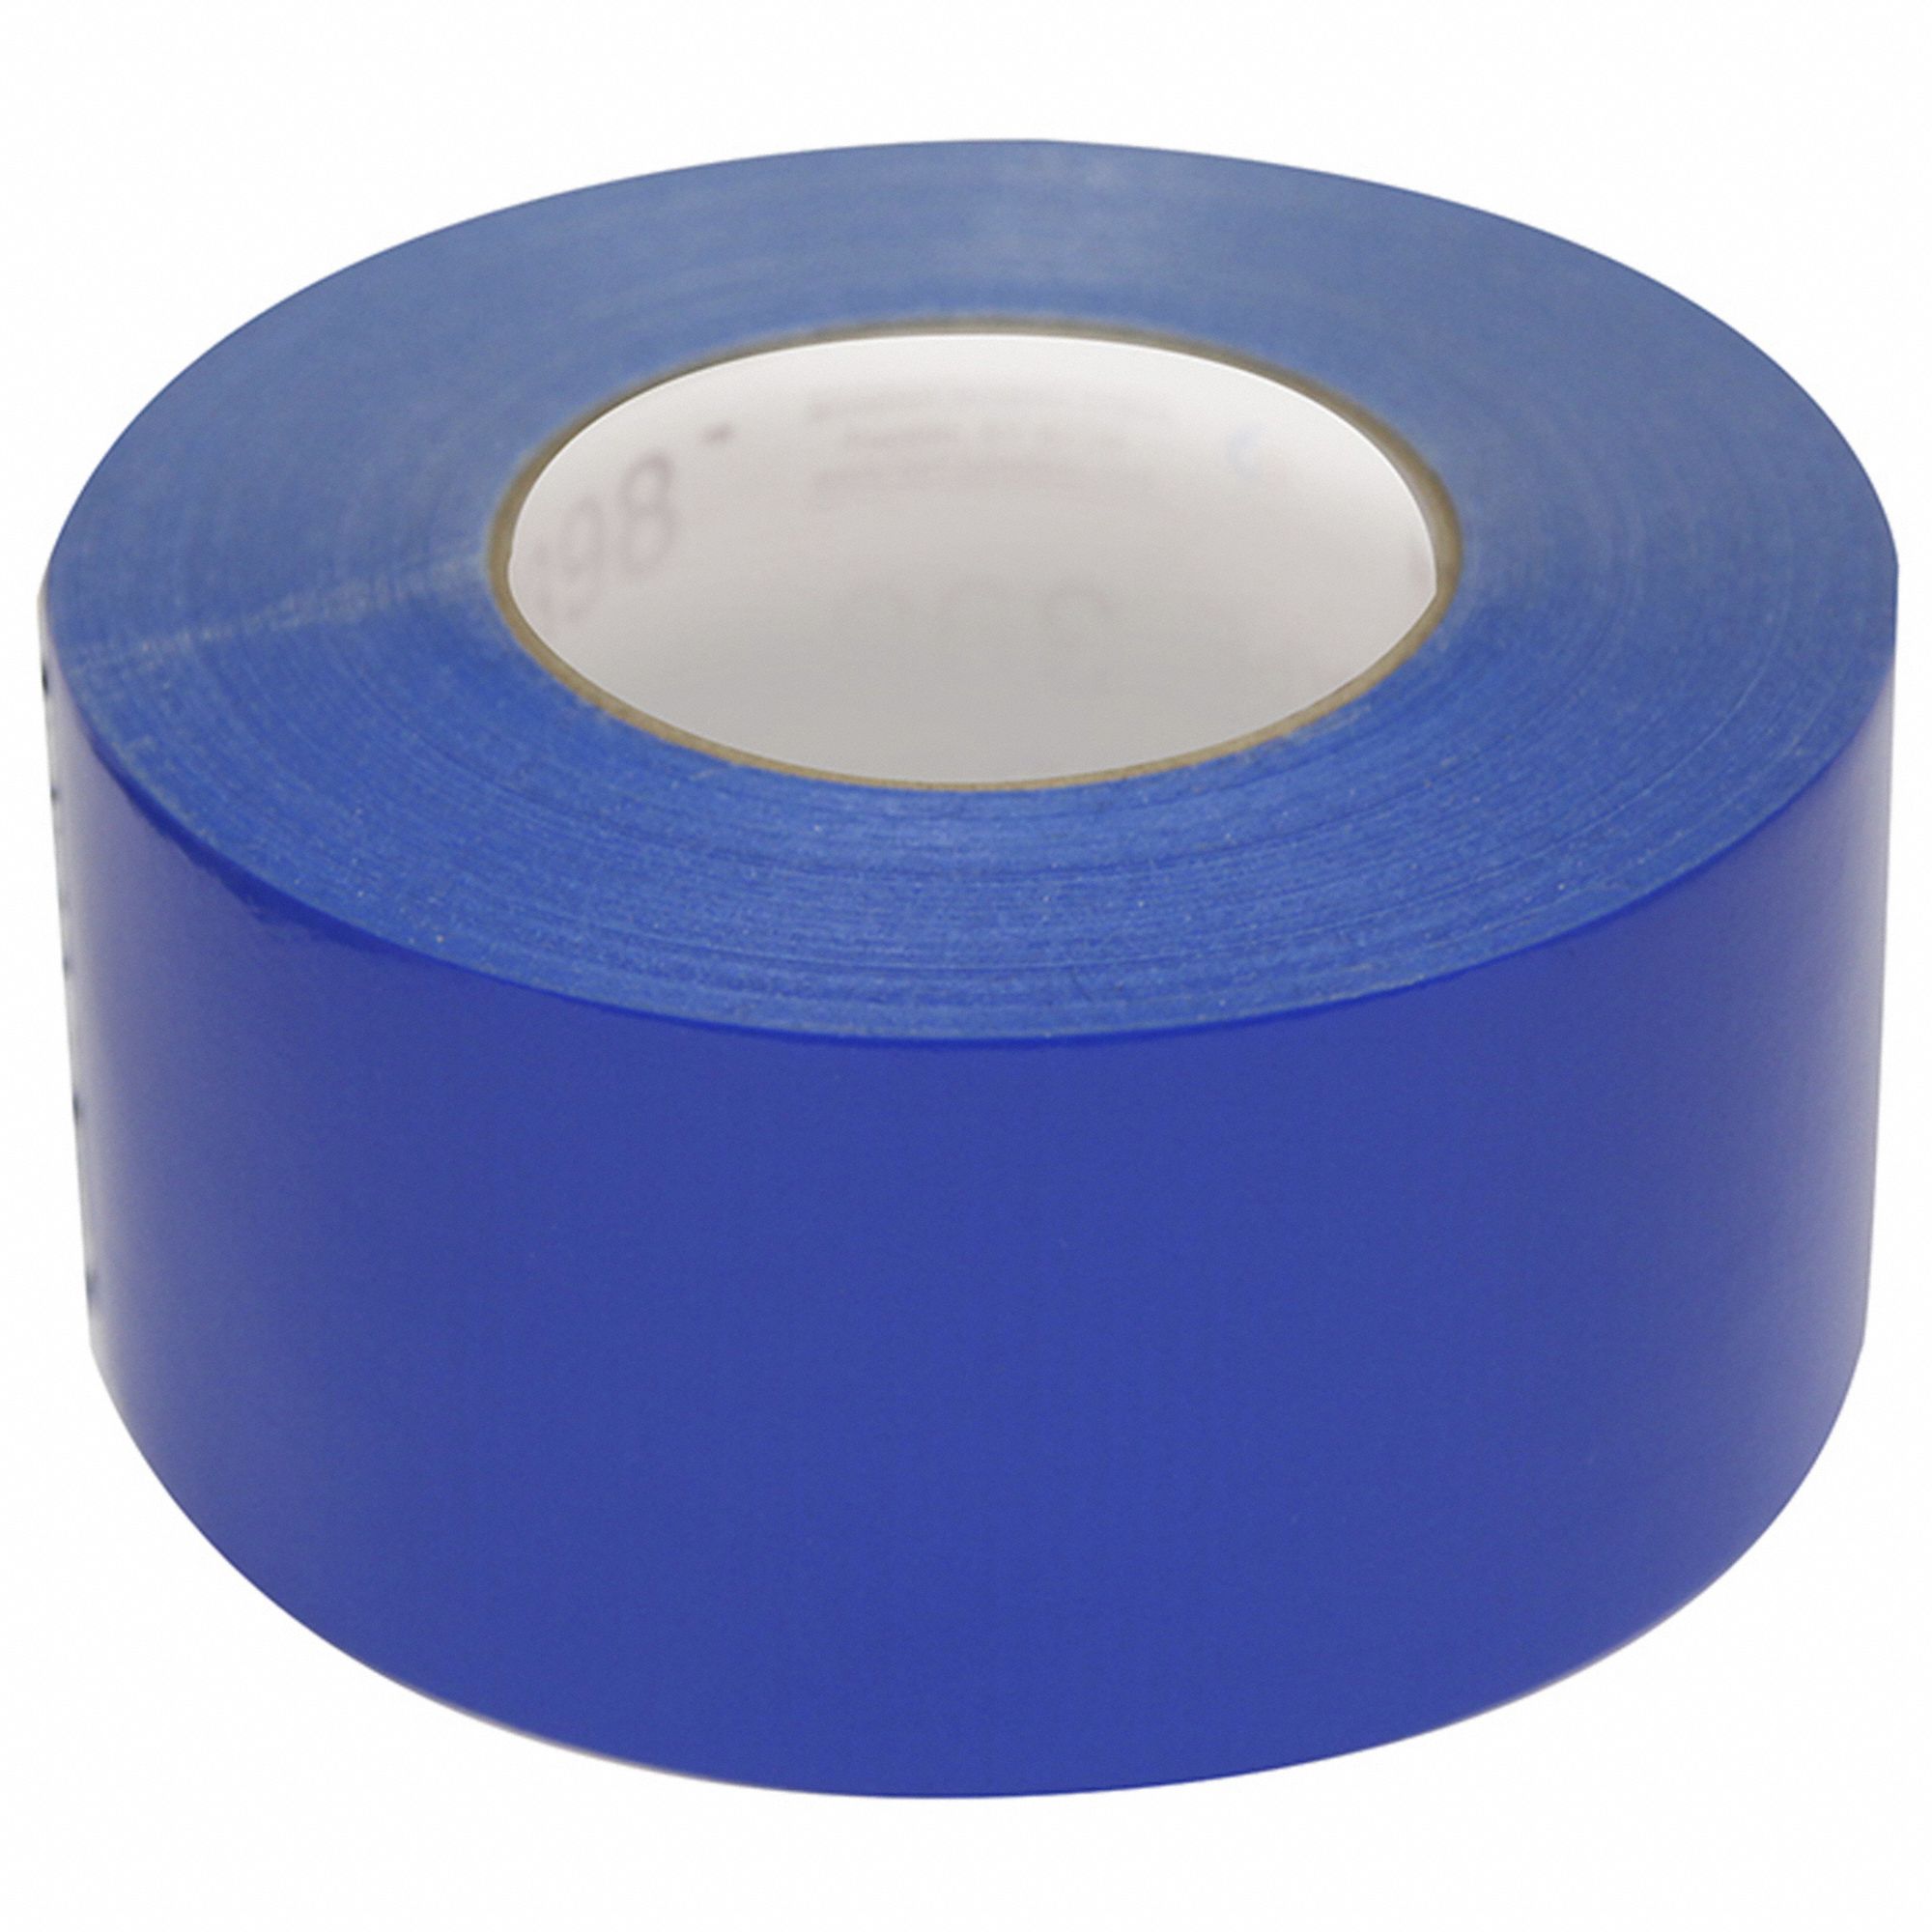 Seam Tape: 2.83 in x 180 ft, Rubber Adhesive, Indoor Only, Aqua Shield Seam Tape